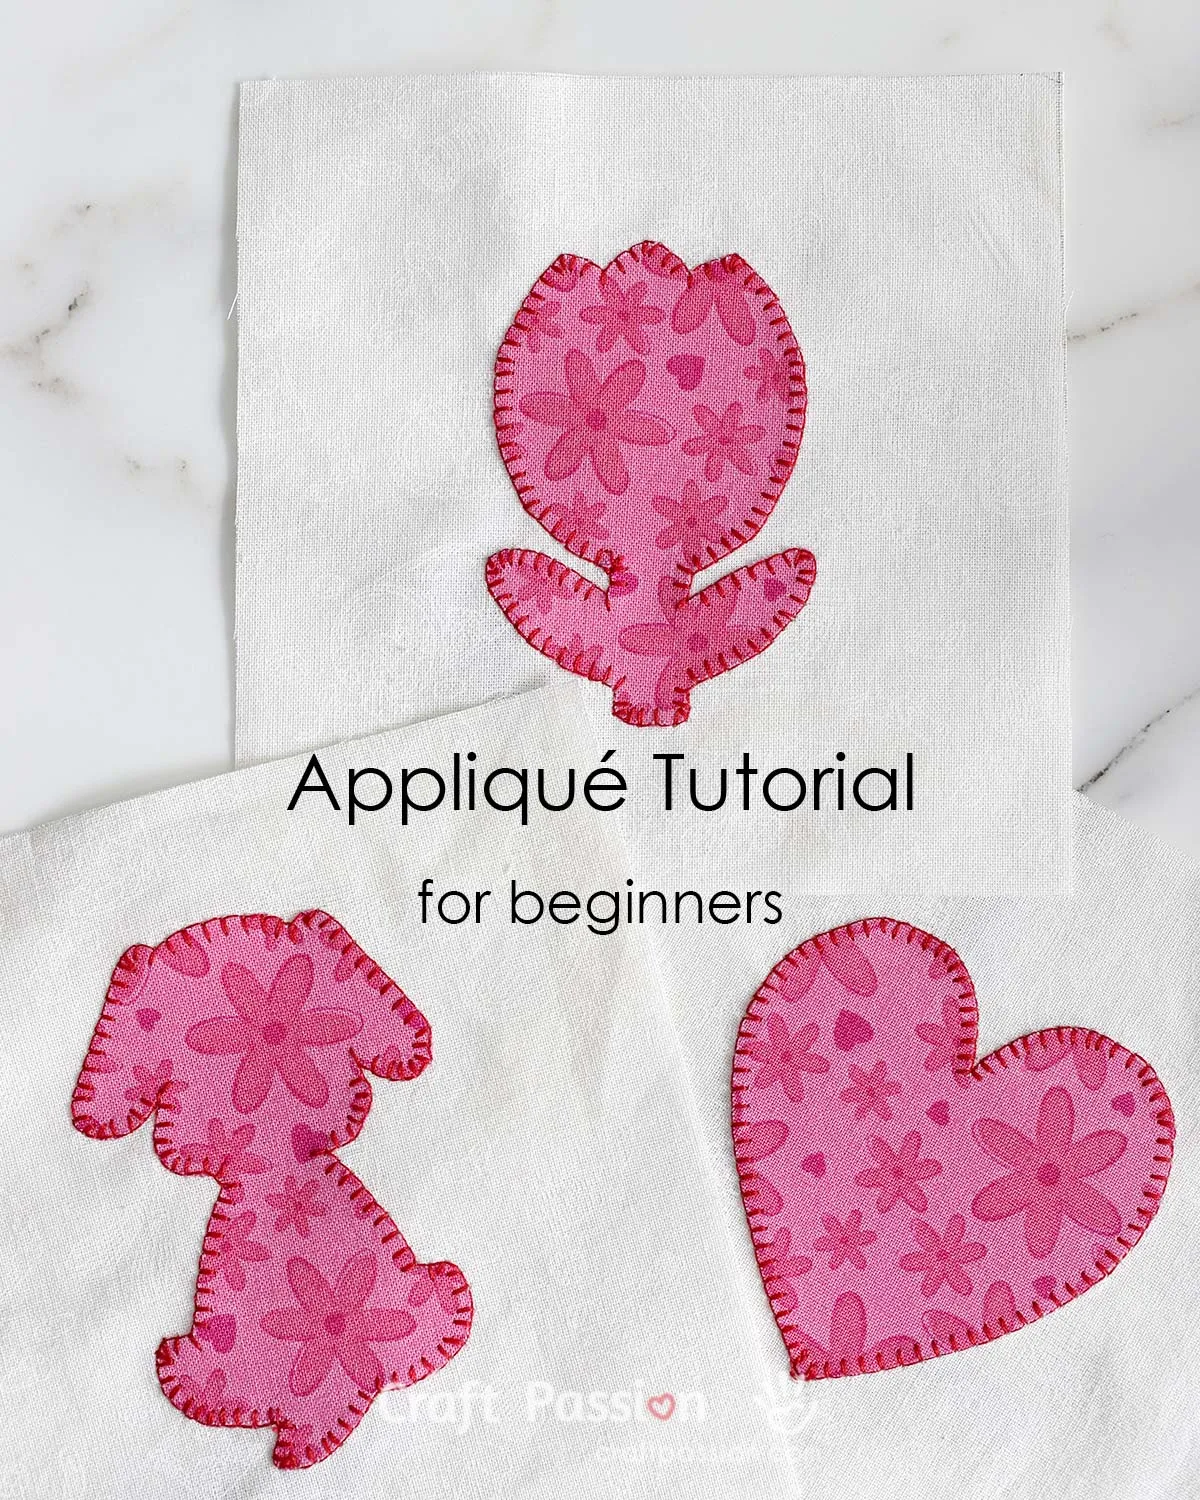 Learn the appliqué basics with our easy guide for beginners. Explore essential techniques, fabric selection tips, & starter stitches for your 1st project.